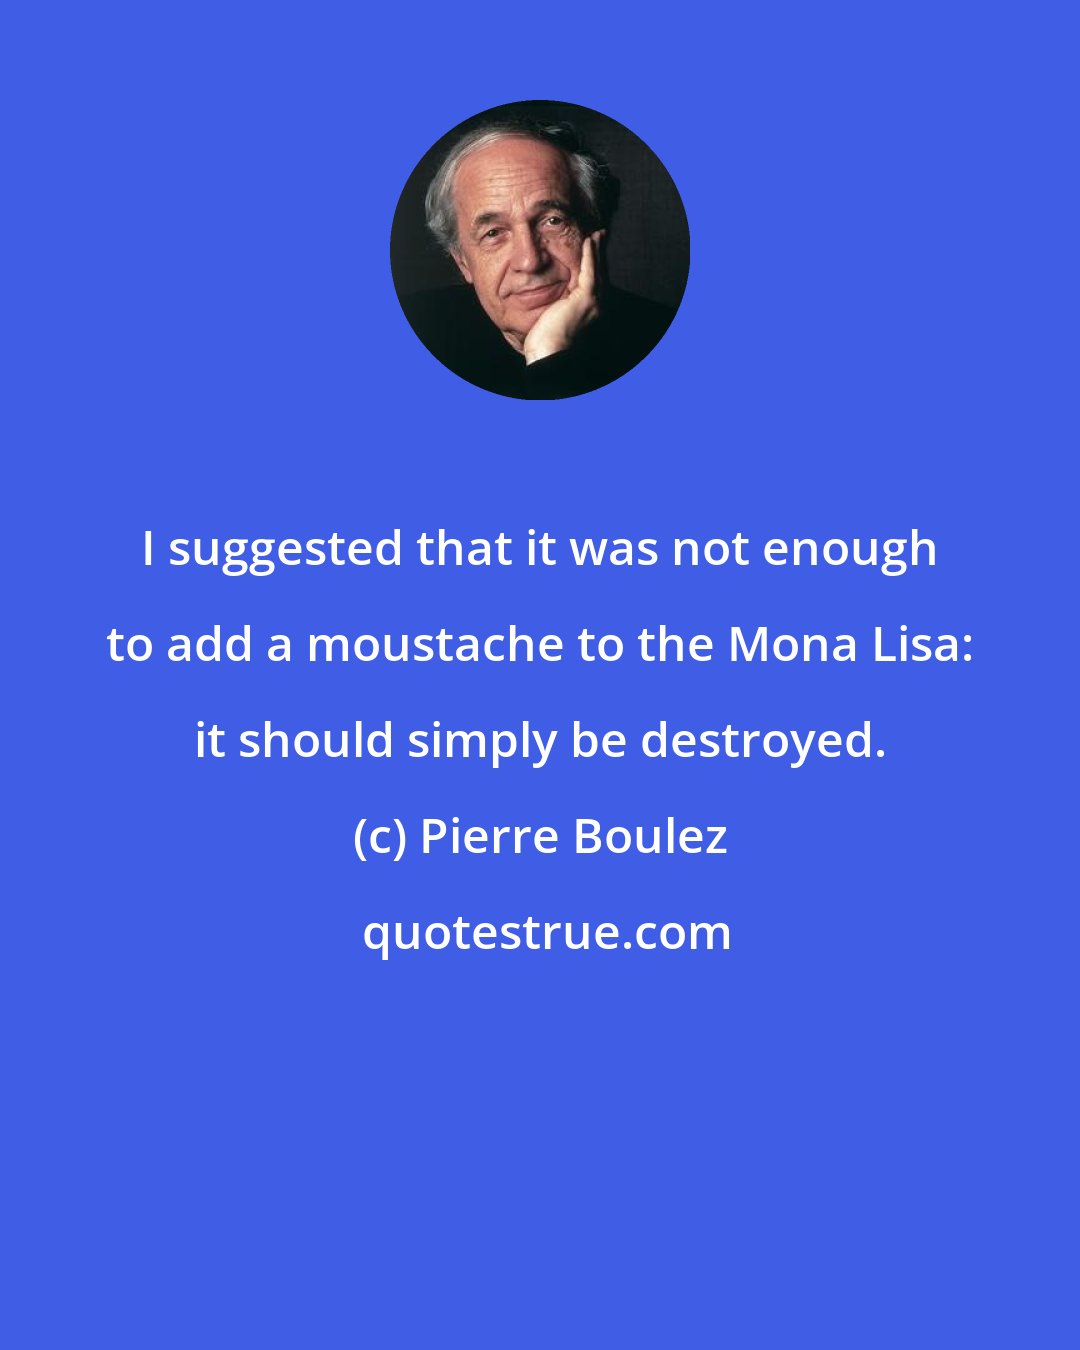 Pierre Boulez: I suggested that it was not enough to add a moustache to the Mona Lisa: it should simply be destroyed.